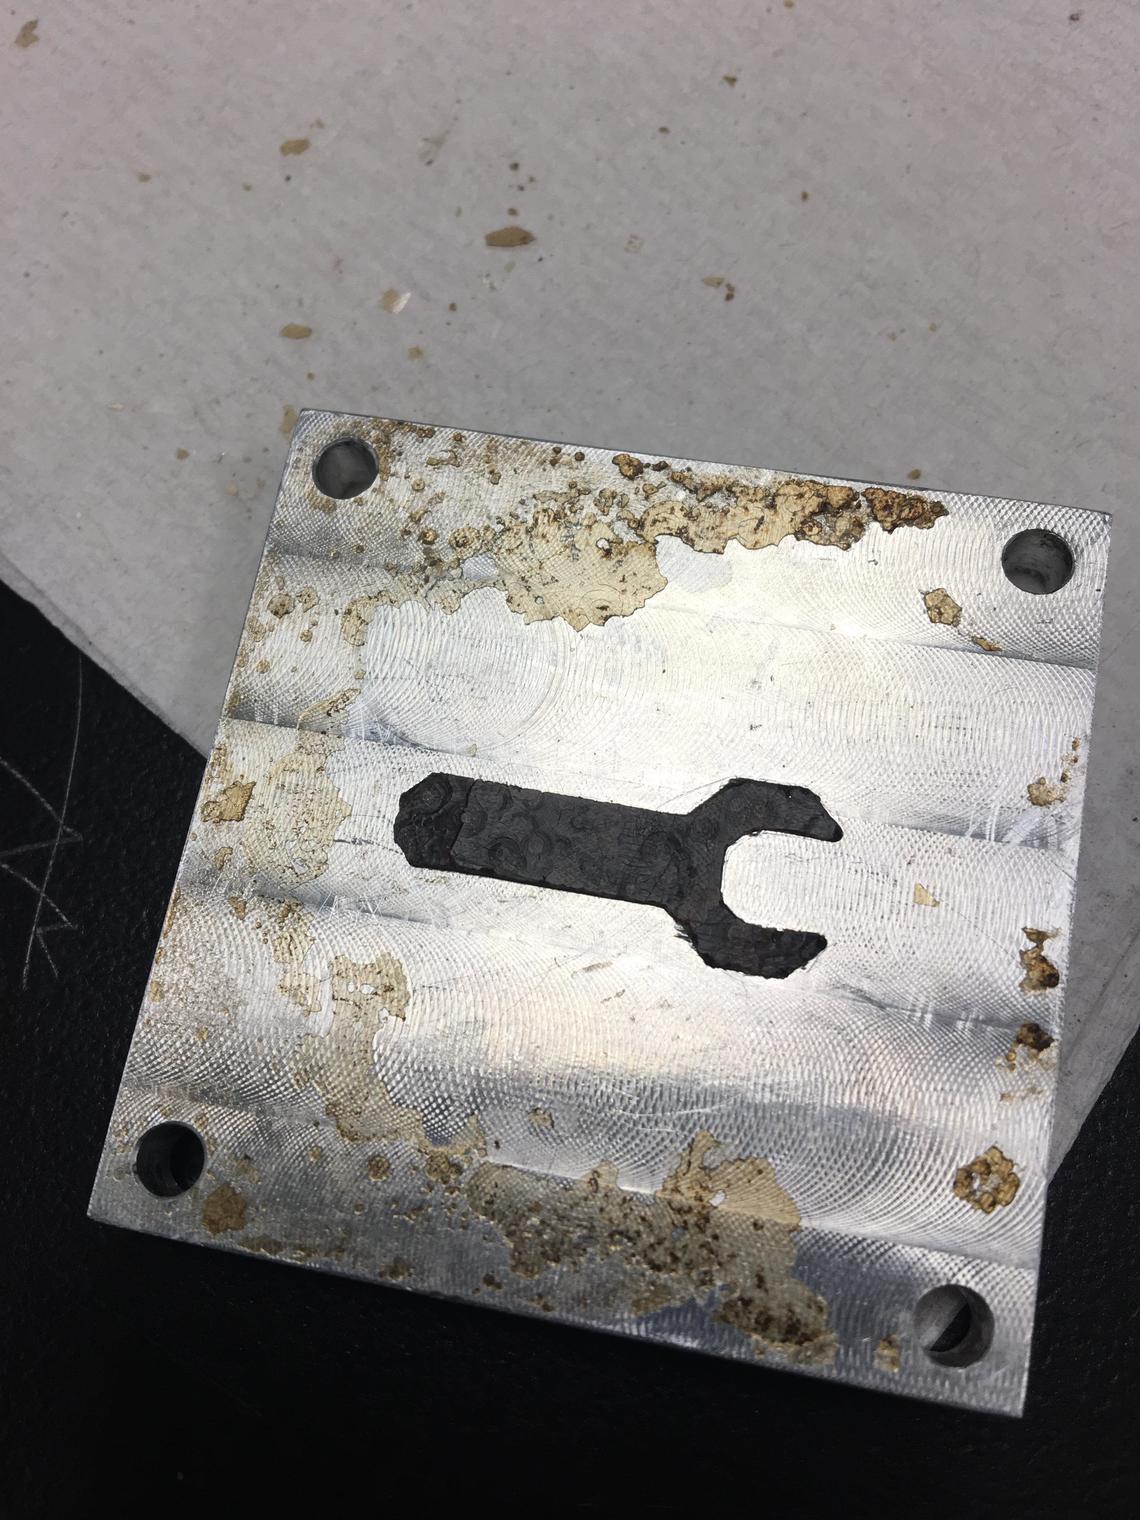 A sample wrench, made out of simulated human waste